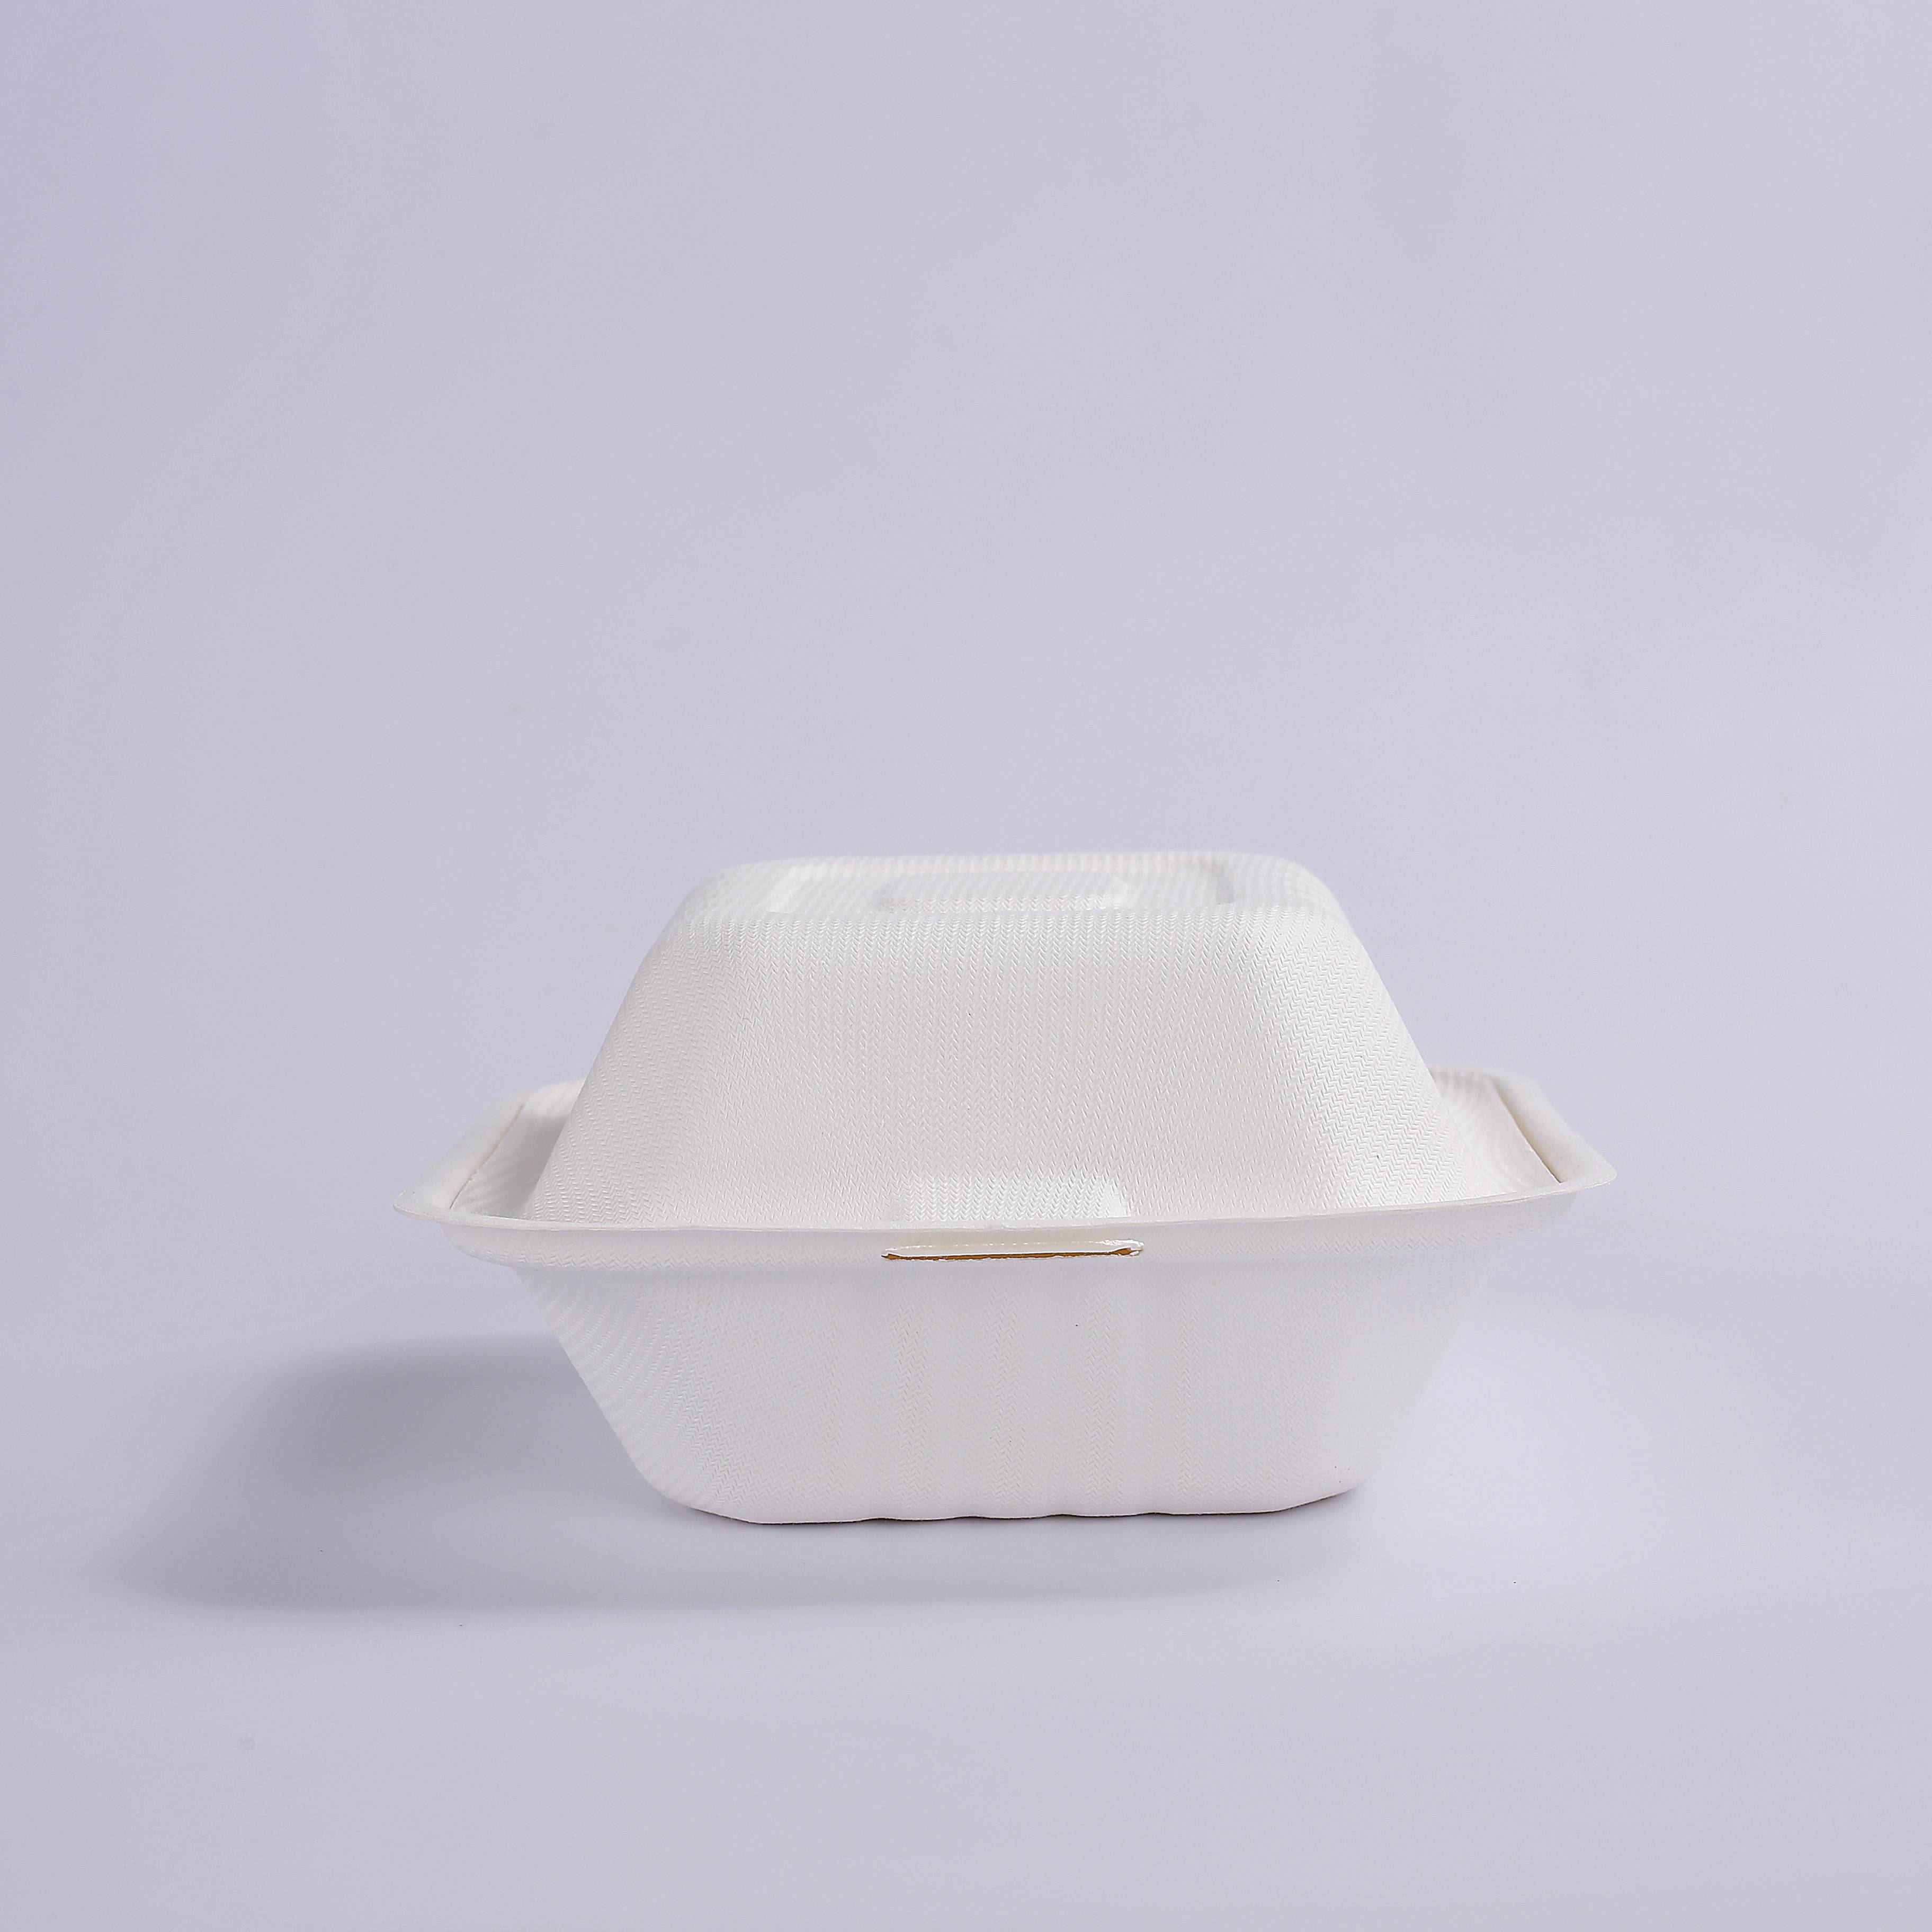 750ml White Take out Food Packaging Containers with Paper Lid, Pet